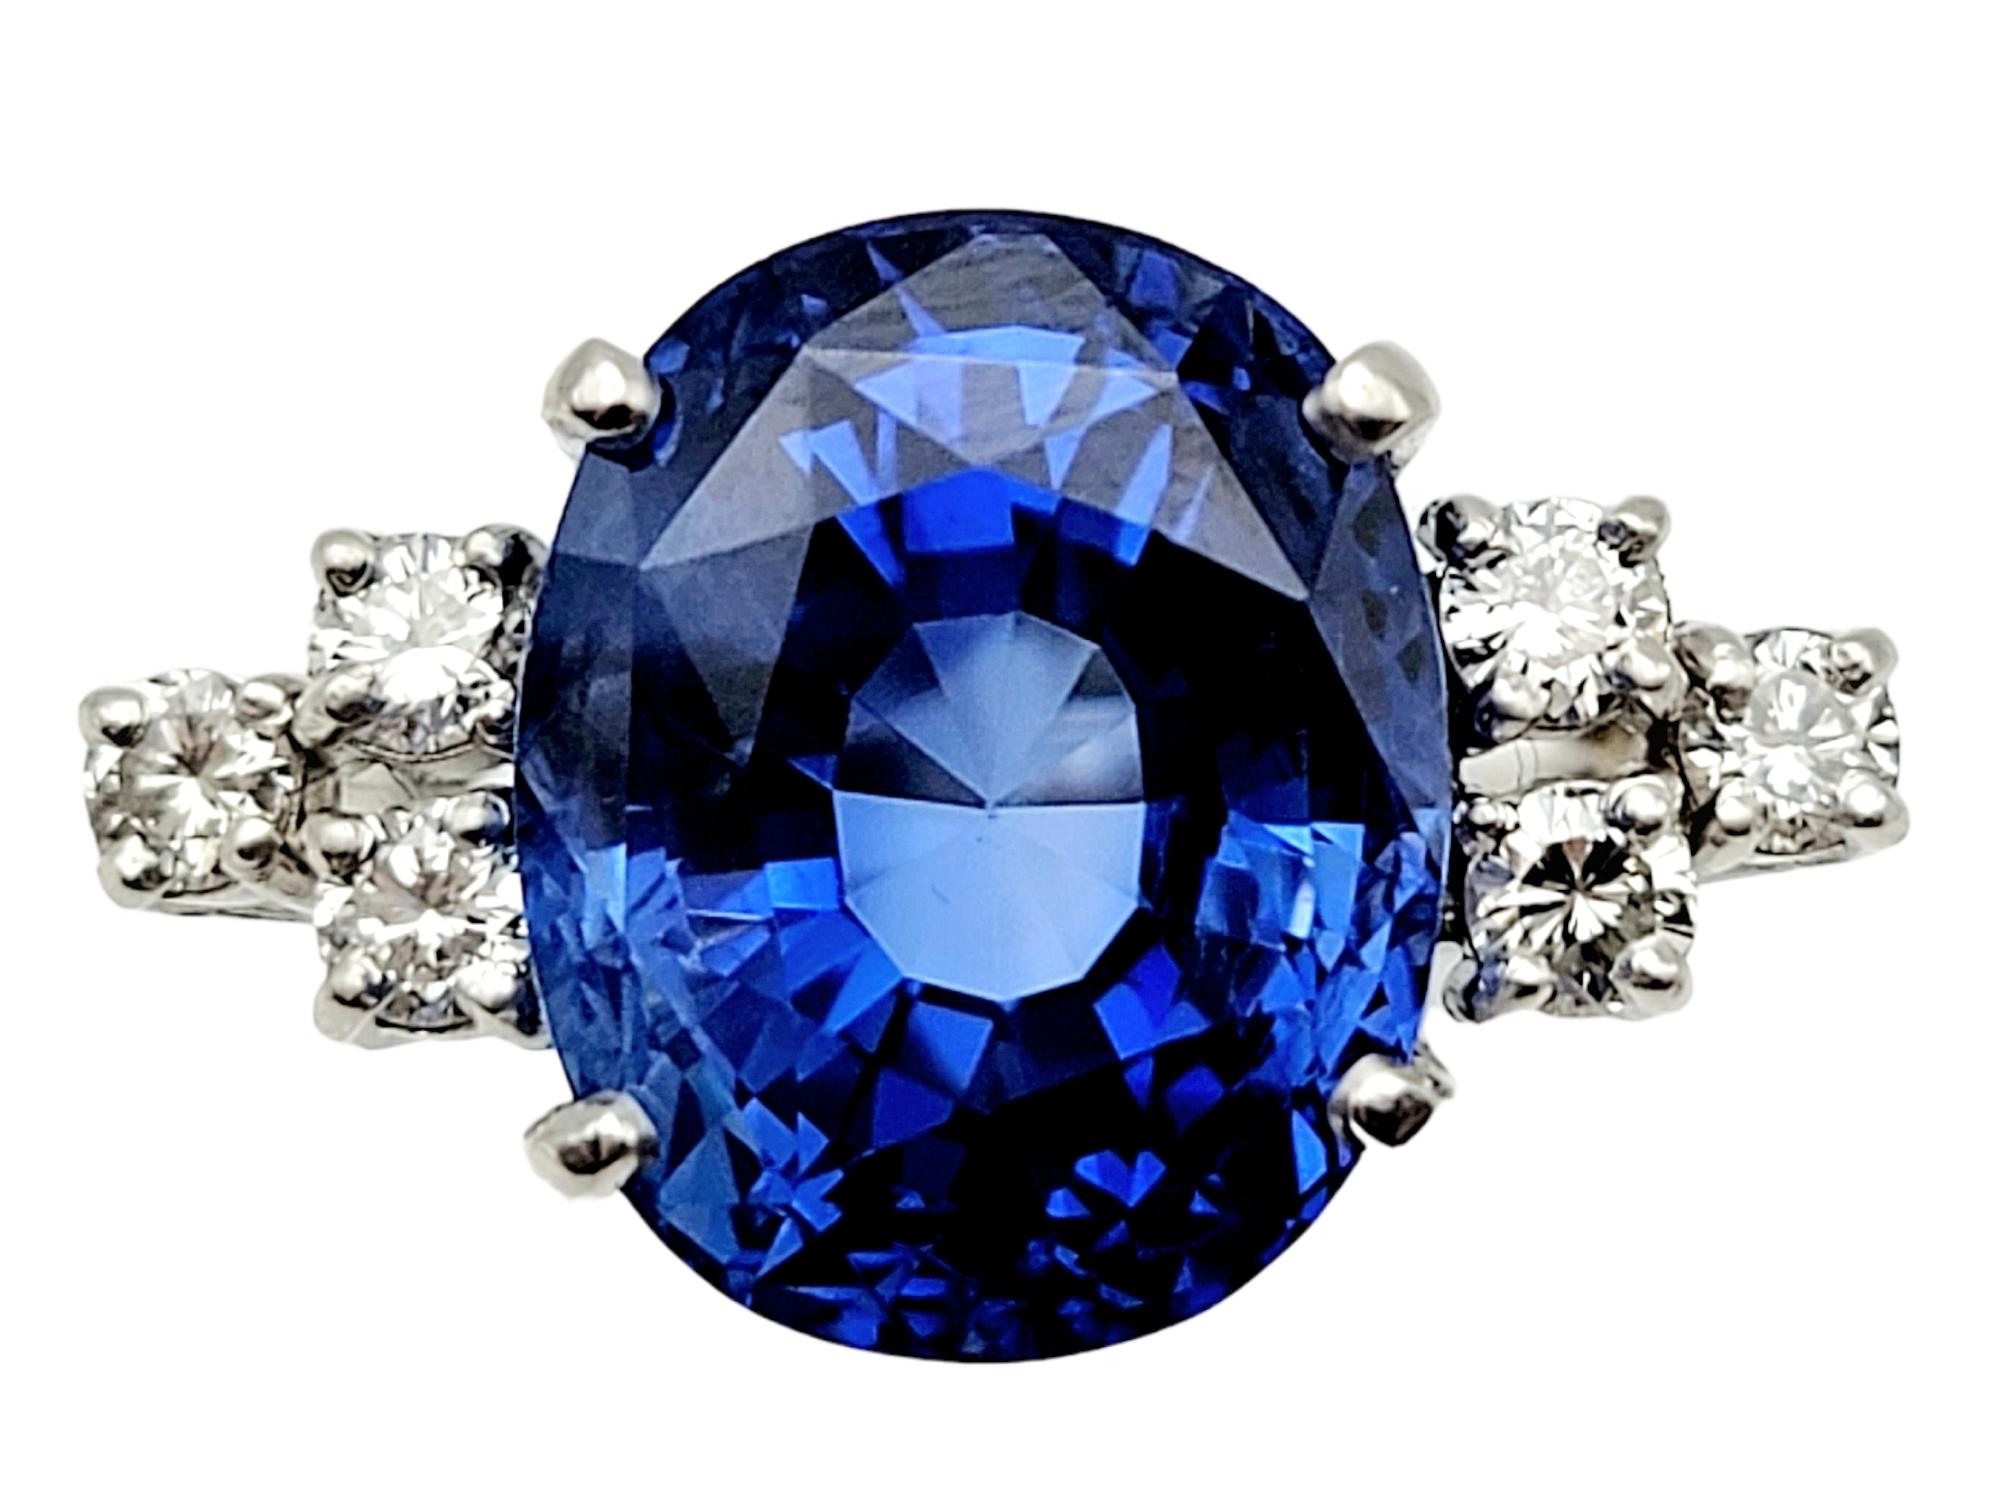 This absolutely jaw dropping, rare oval cut sapphire and diamond cocktail ring is one of those pieces that you will always adore. The massive, bright, and brilliant blue stone is mesmerizing because of the color, size, and clarity. It is set high ,